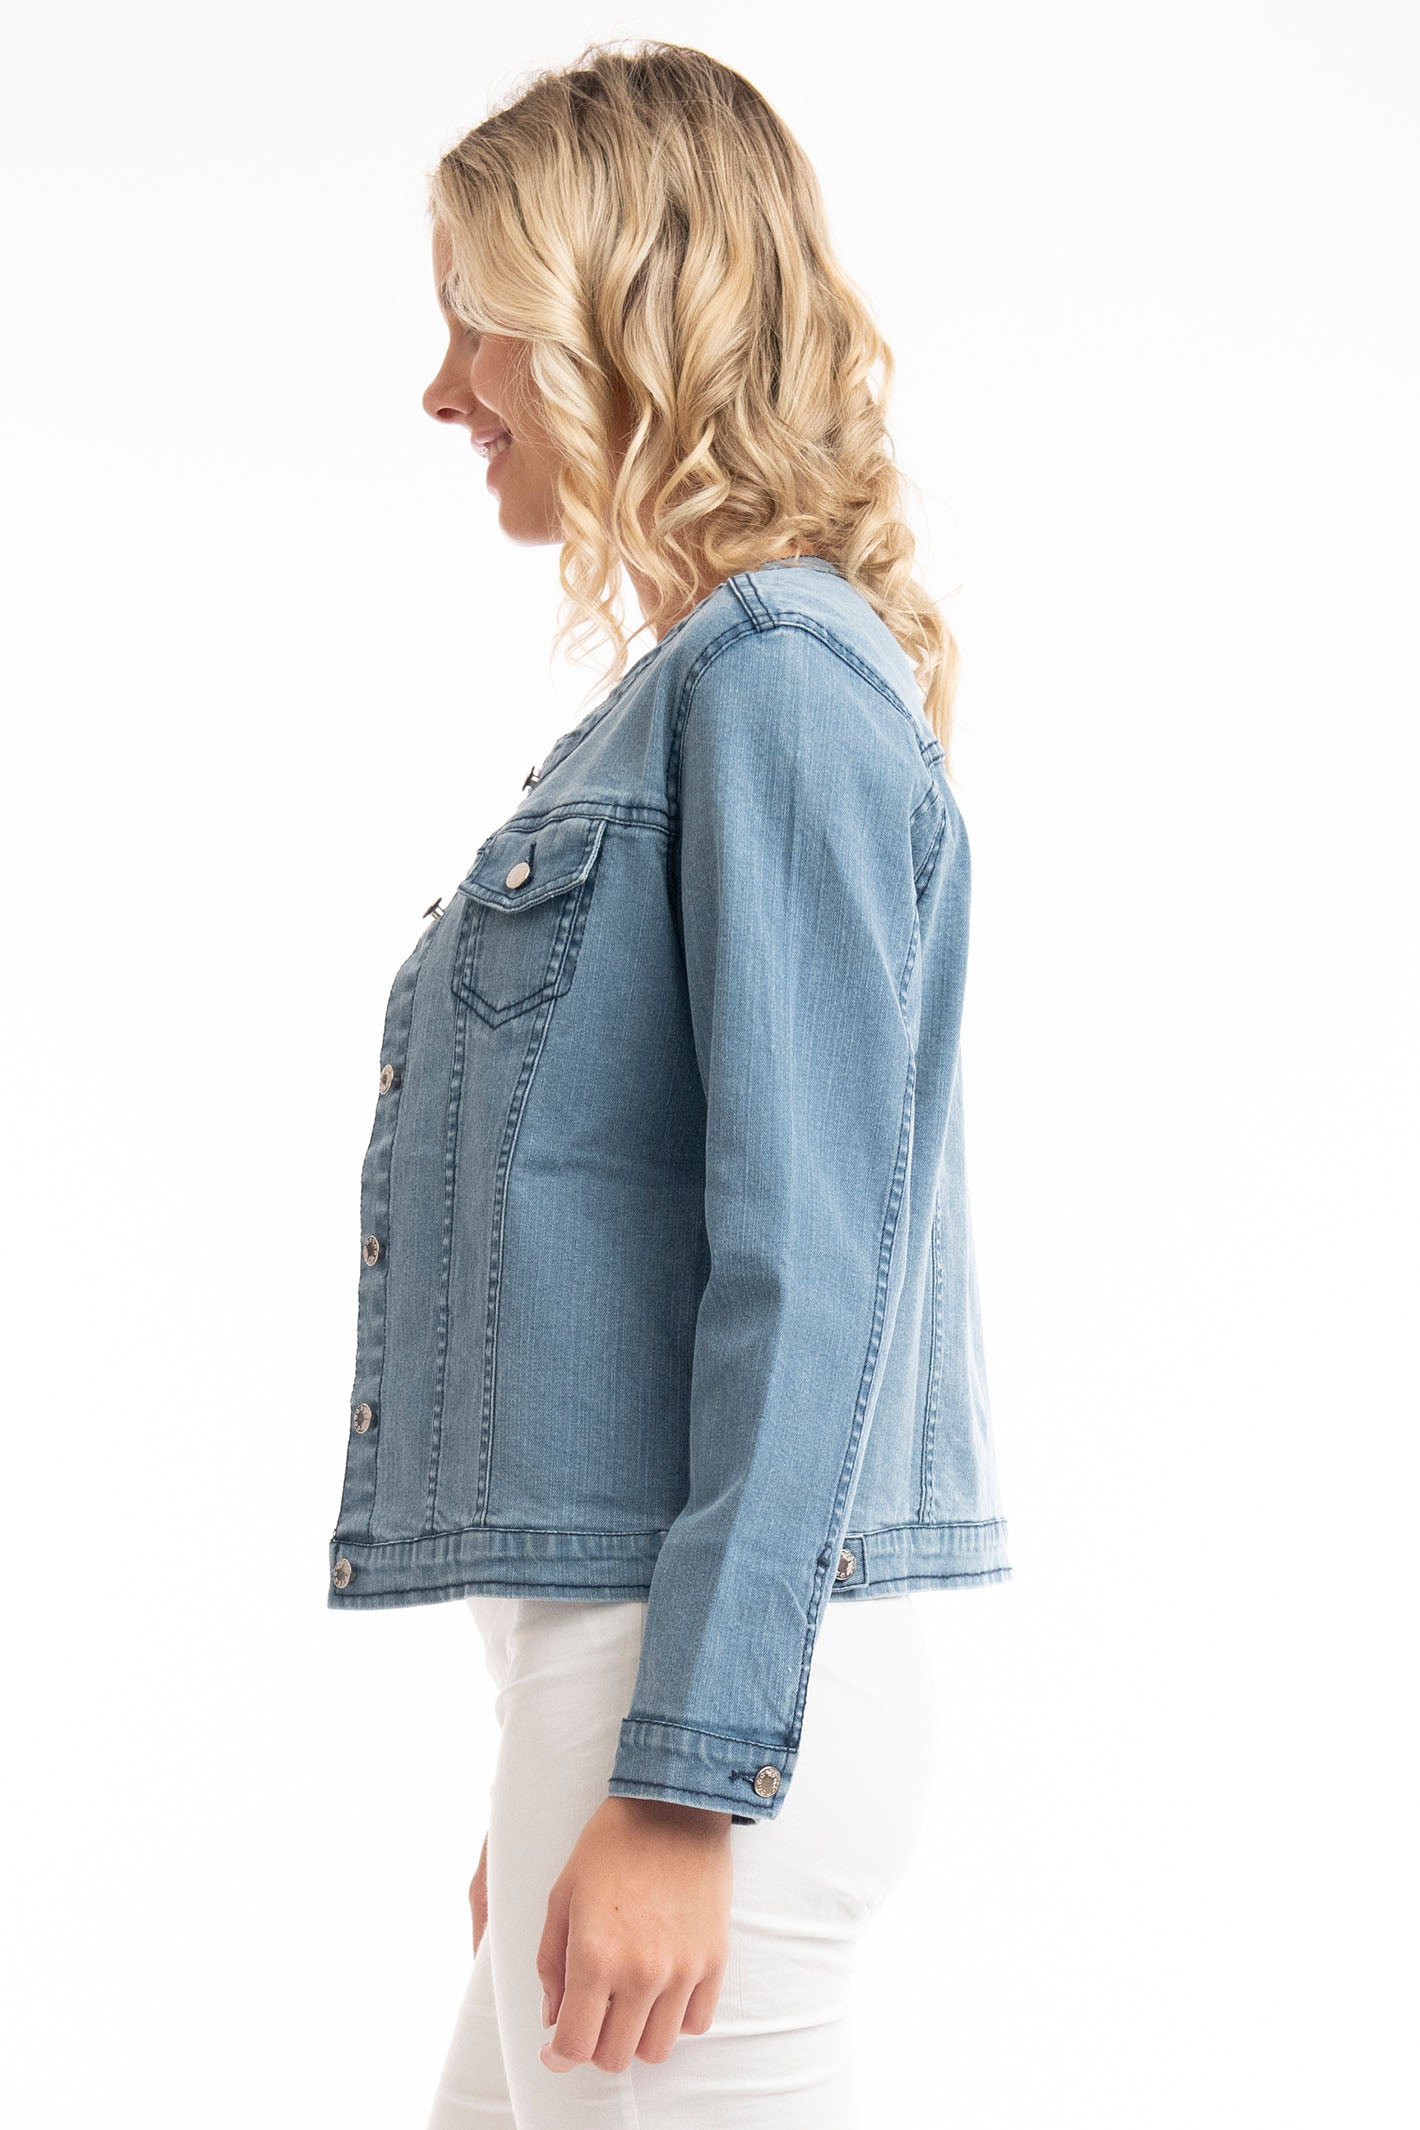 Women's Collarless Denim Jacket from Crew Clothing Company